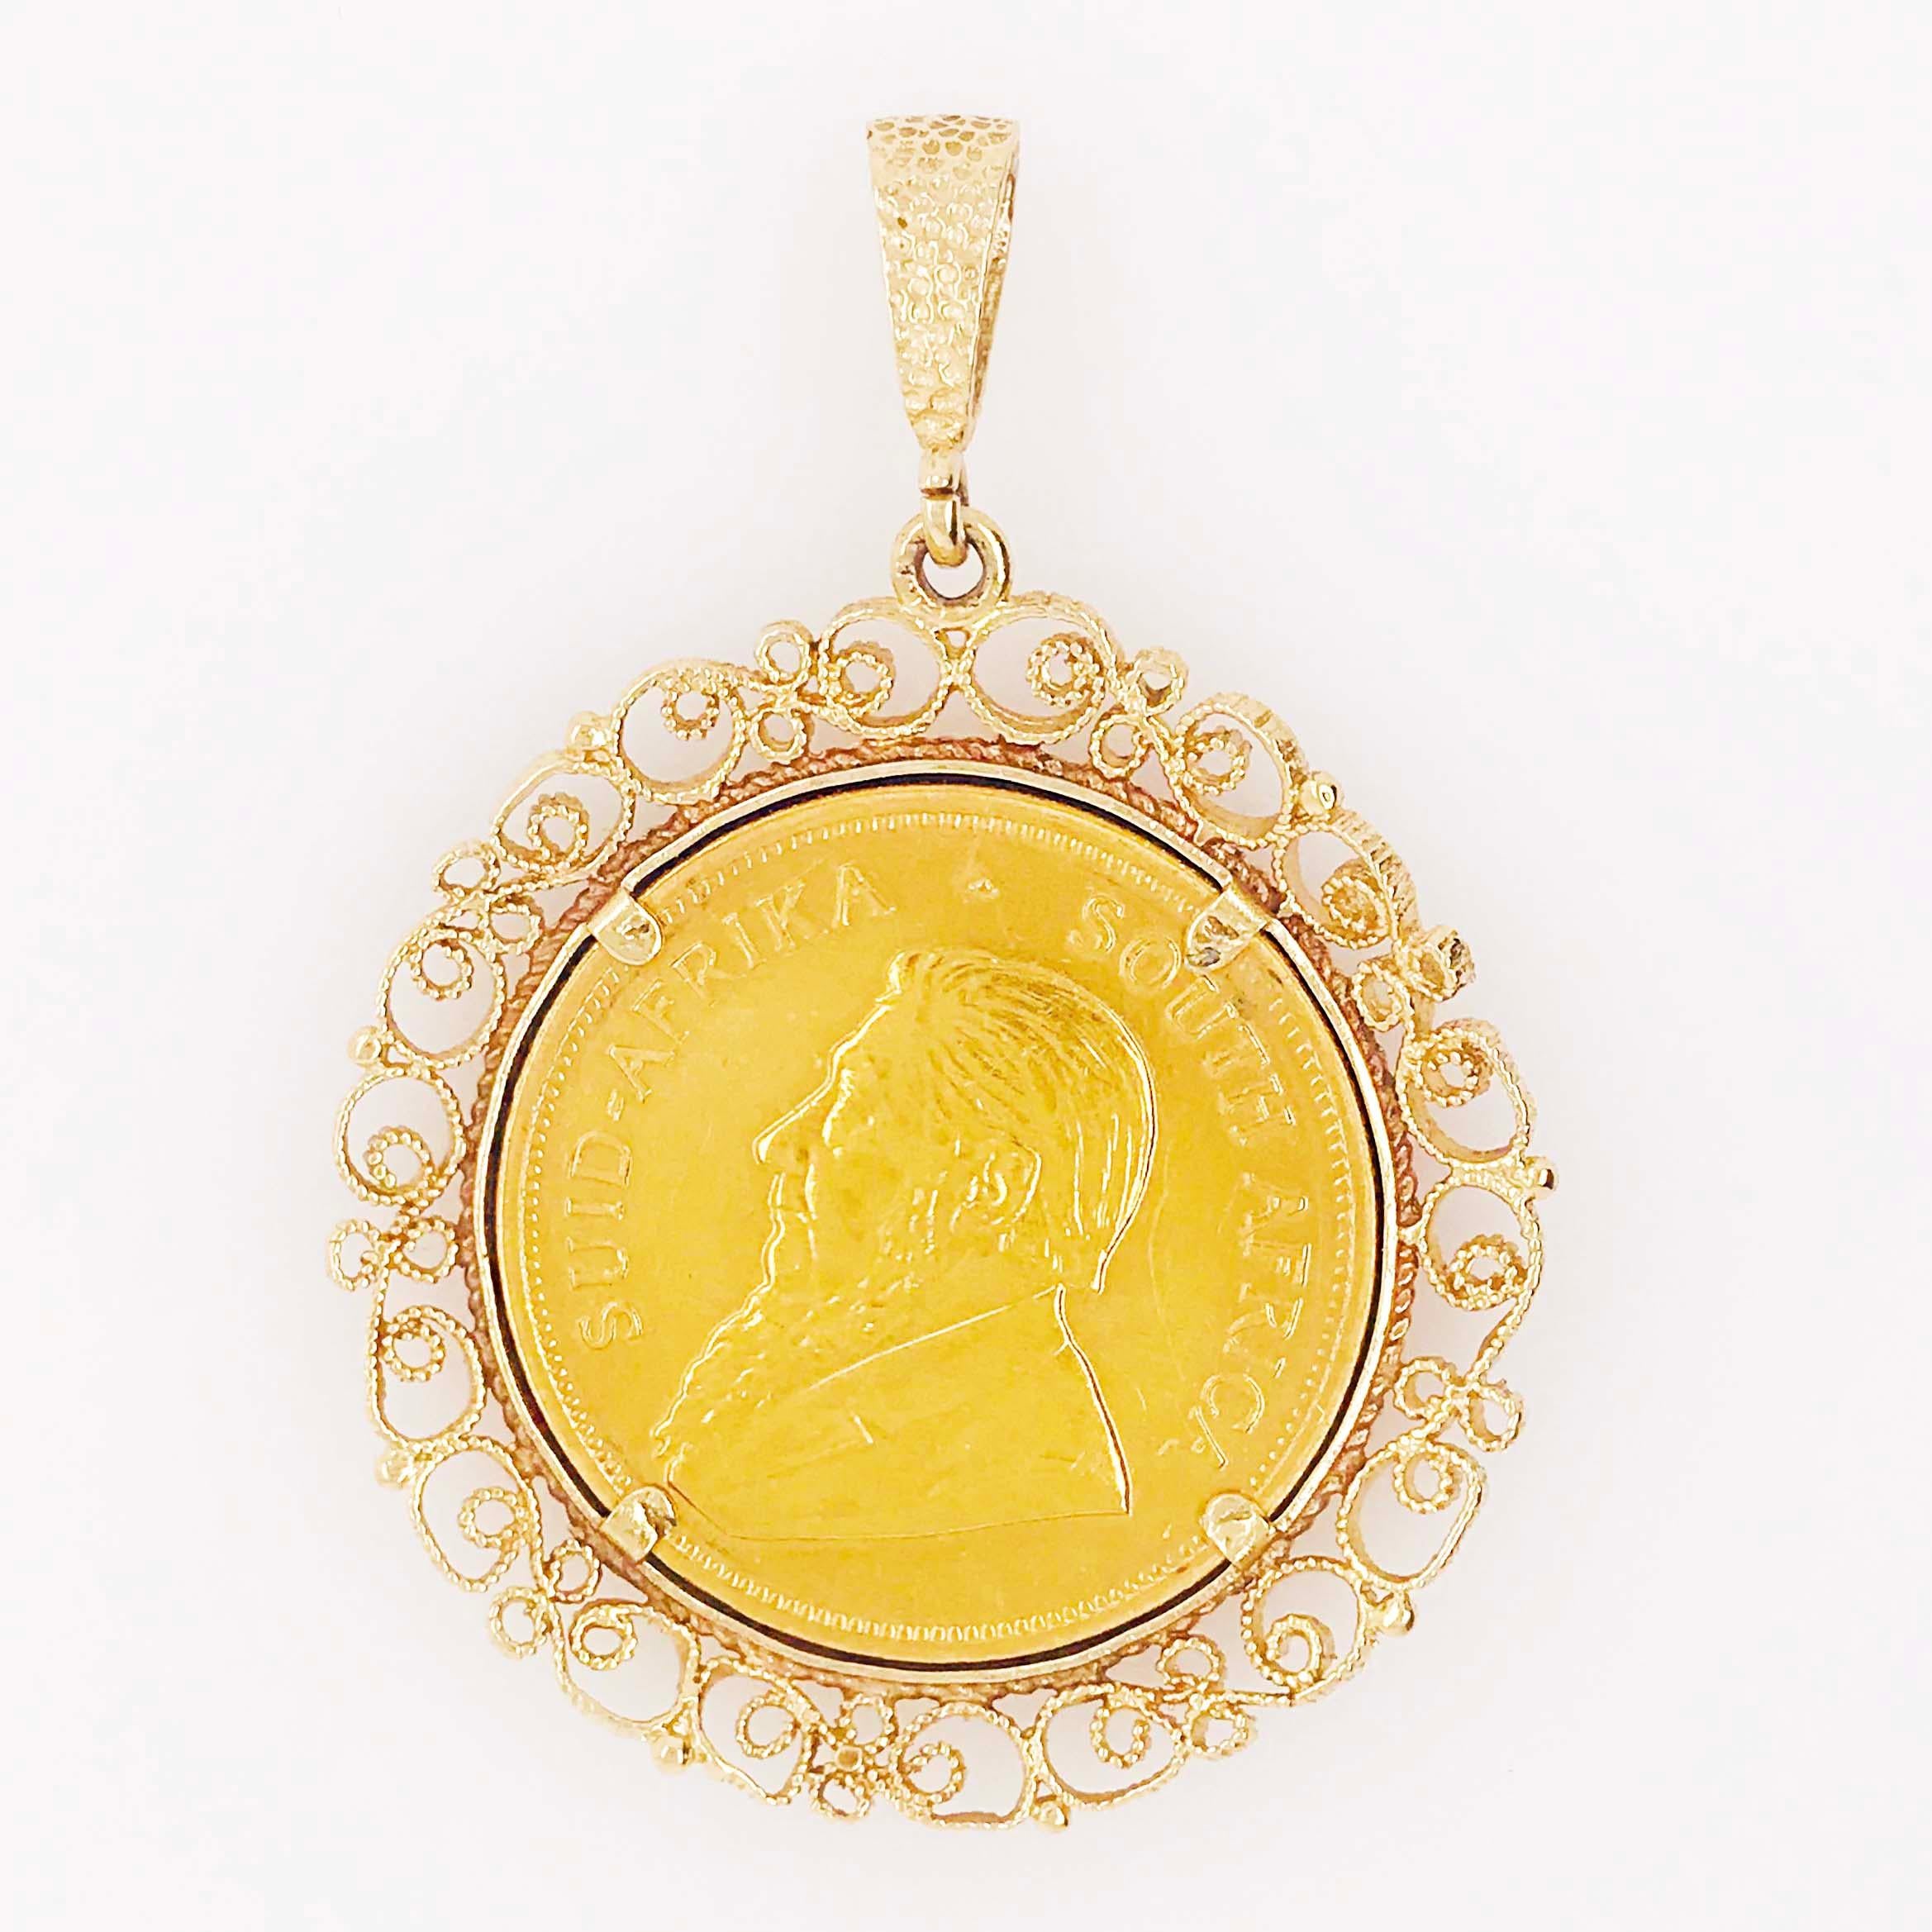 Women's or Men's 1976 South Africa 1 oz Krugerrand Gold Coin with Custom Gold Lace Filigree Bezel